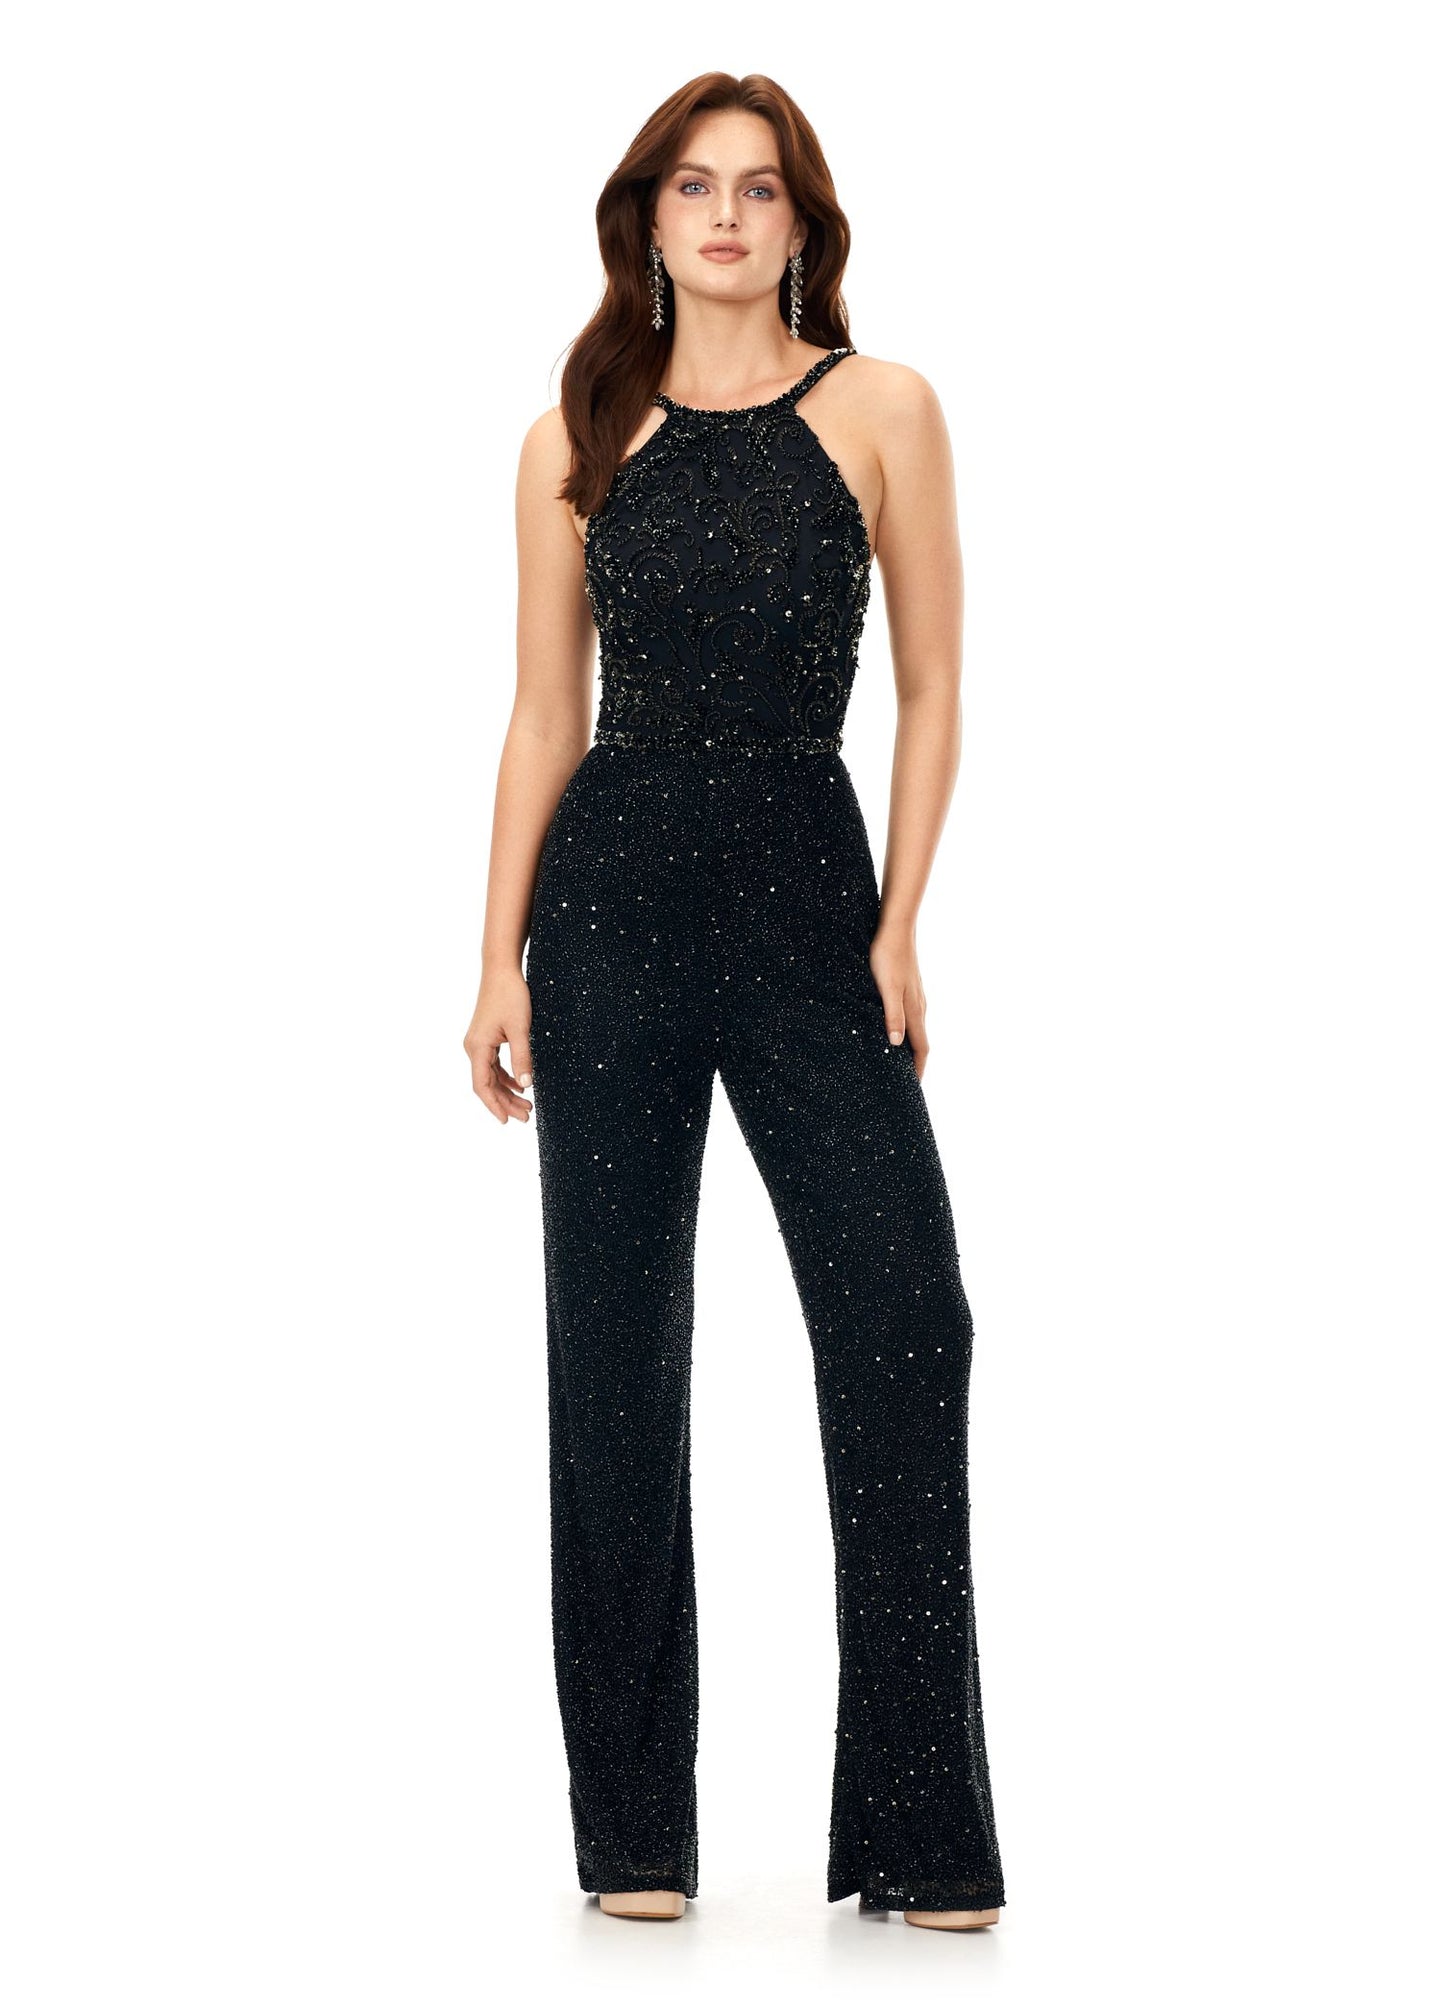 Ashley Lauren 11339 This unique halter style jumpsuit features an intricately beaded bodice, open back and wide leg pants. Halter Neckline Open Back Wide Leg Pants Fully Hand Beaded COLORS: Black, Ivory, Lilac